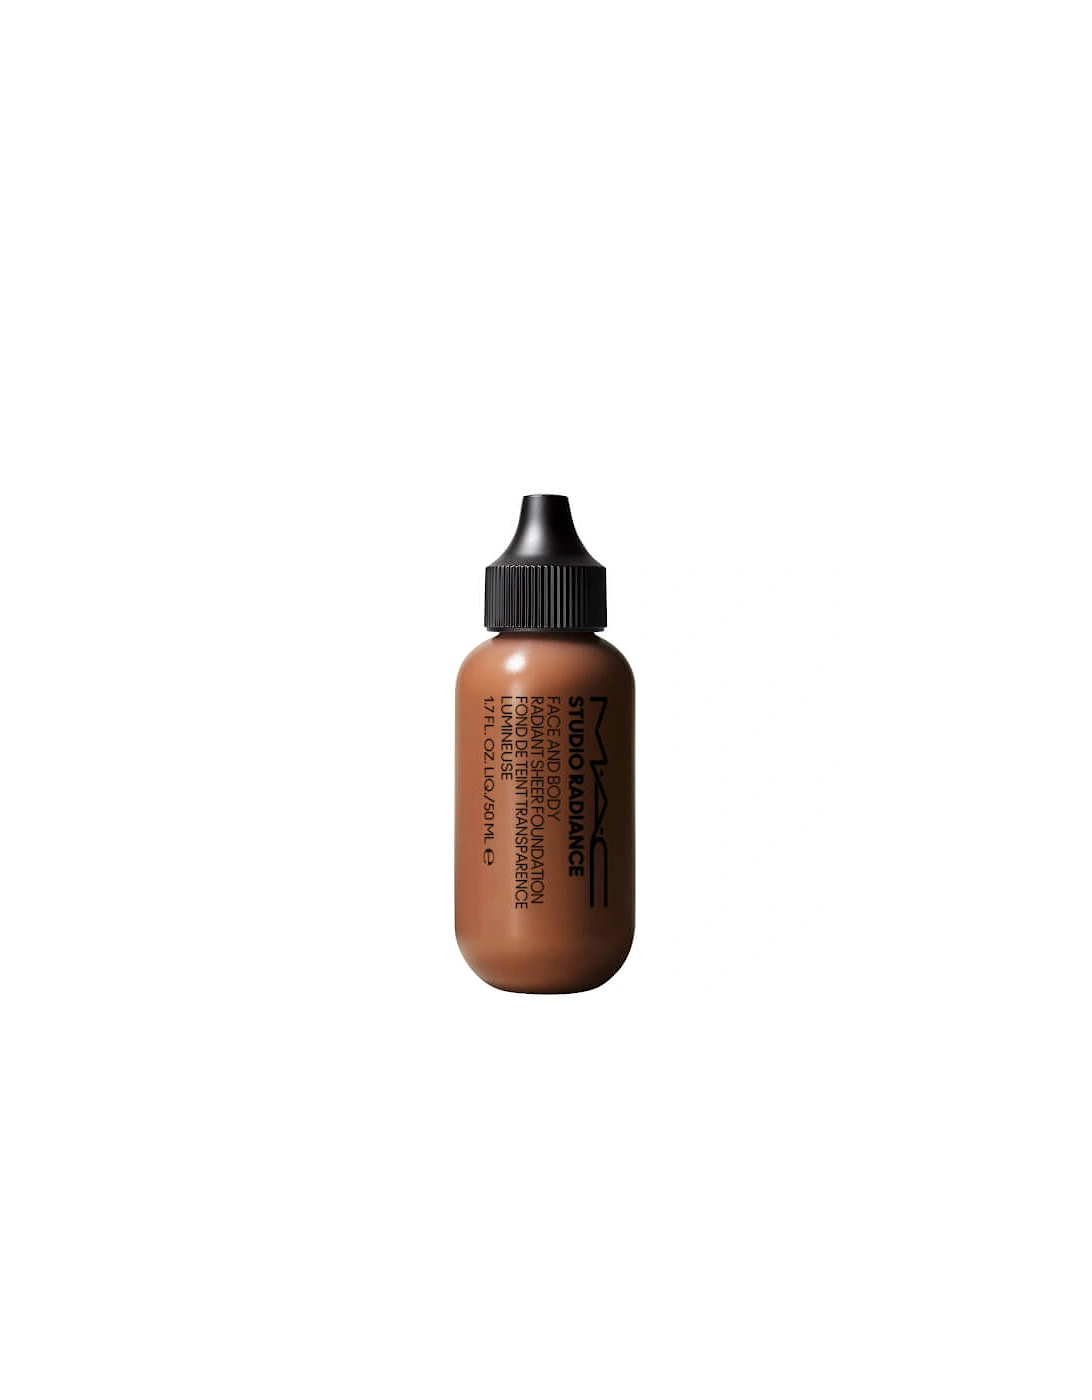 Studio Face and Body Radiant Sheer Foundation - C8, 2 of 1